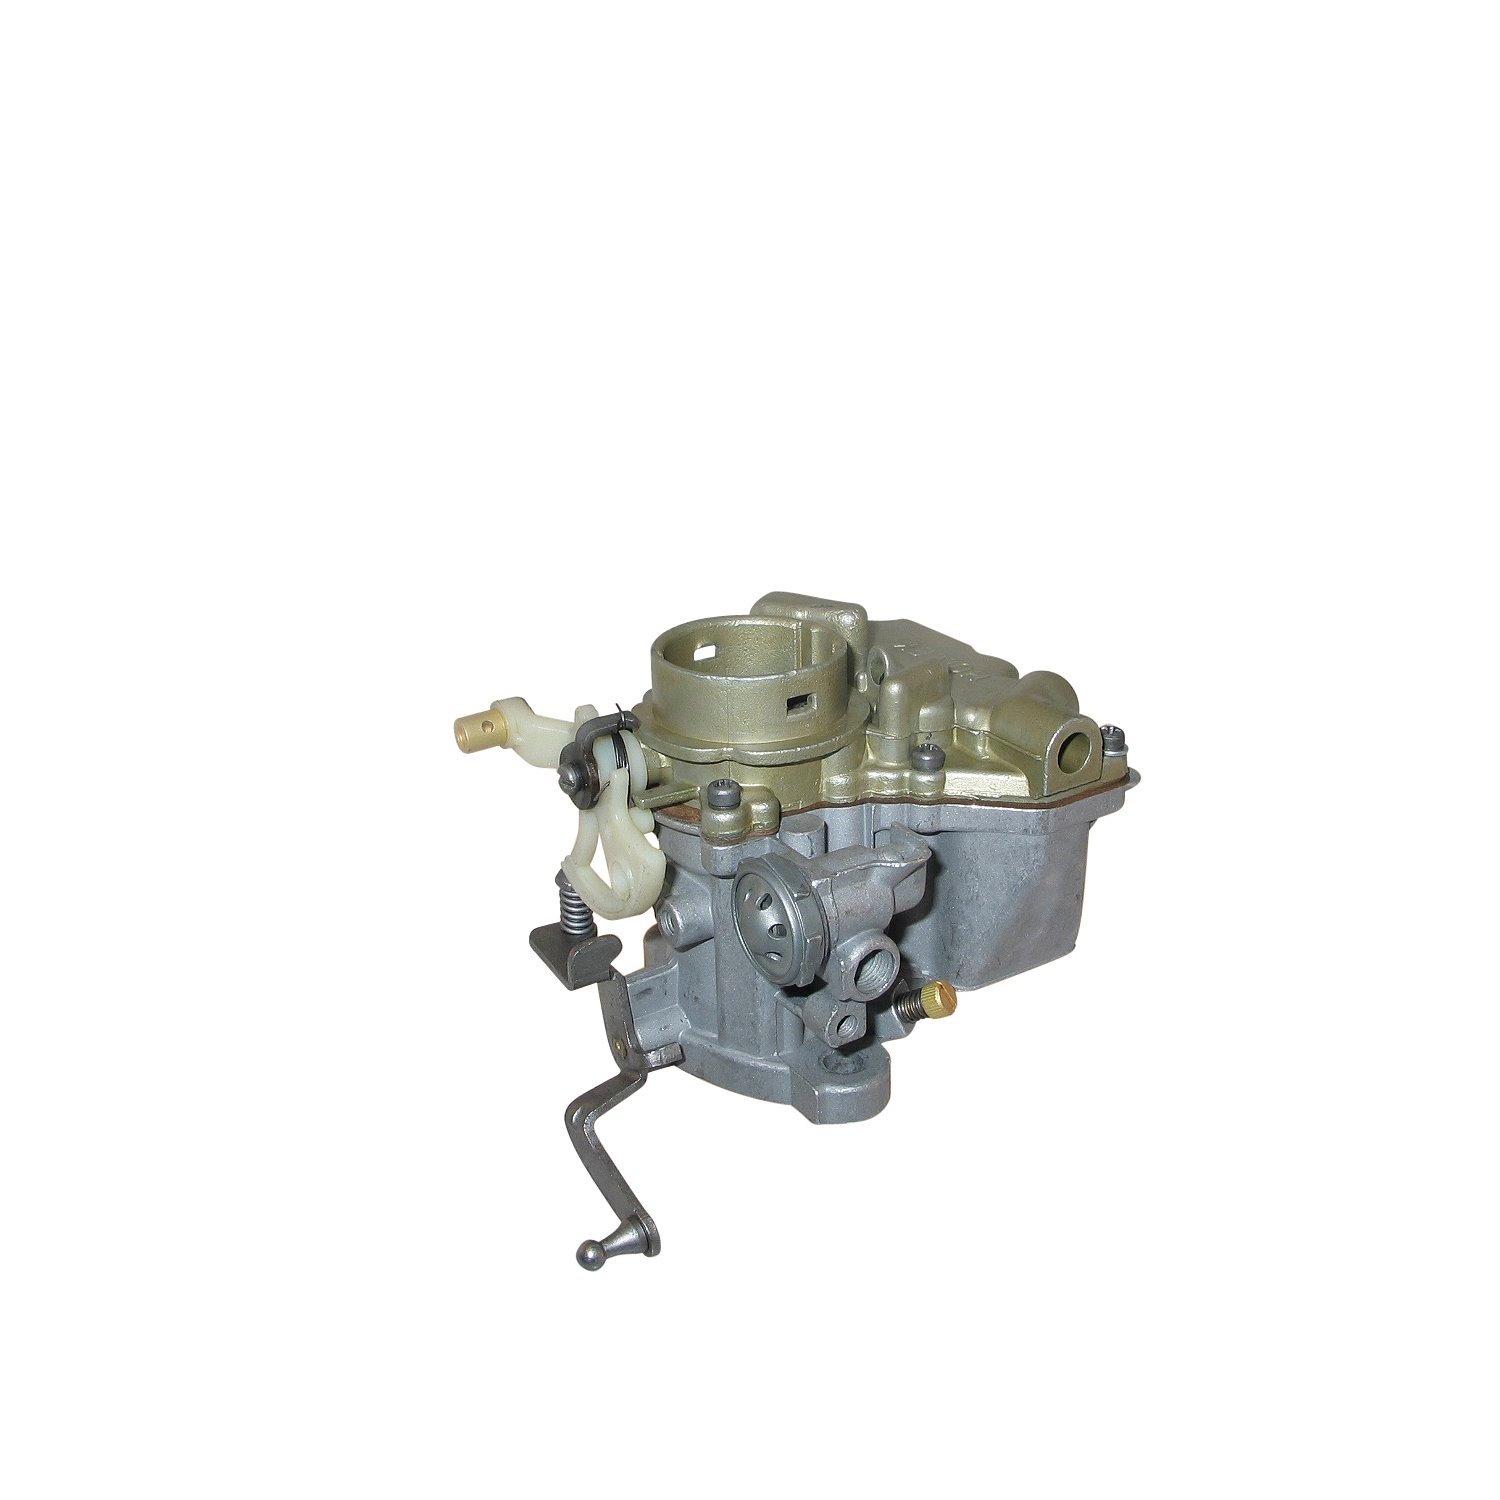 7-7130 Holley Remanufactured Carburetor, 1920-Style